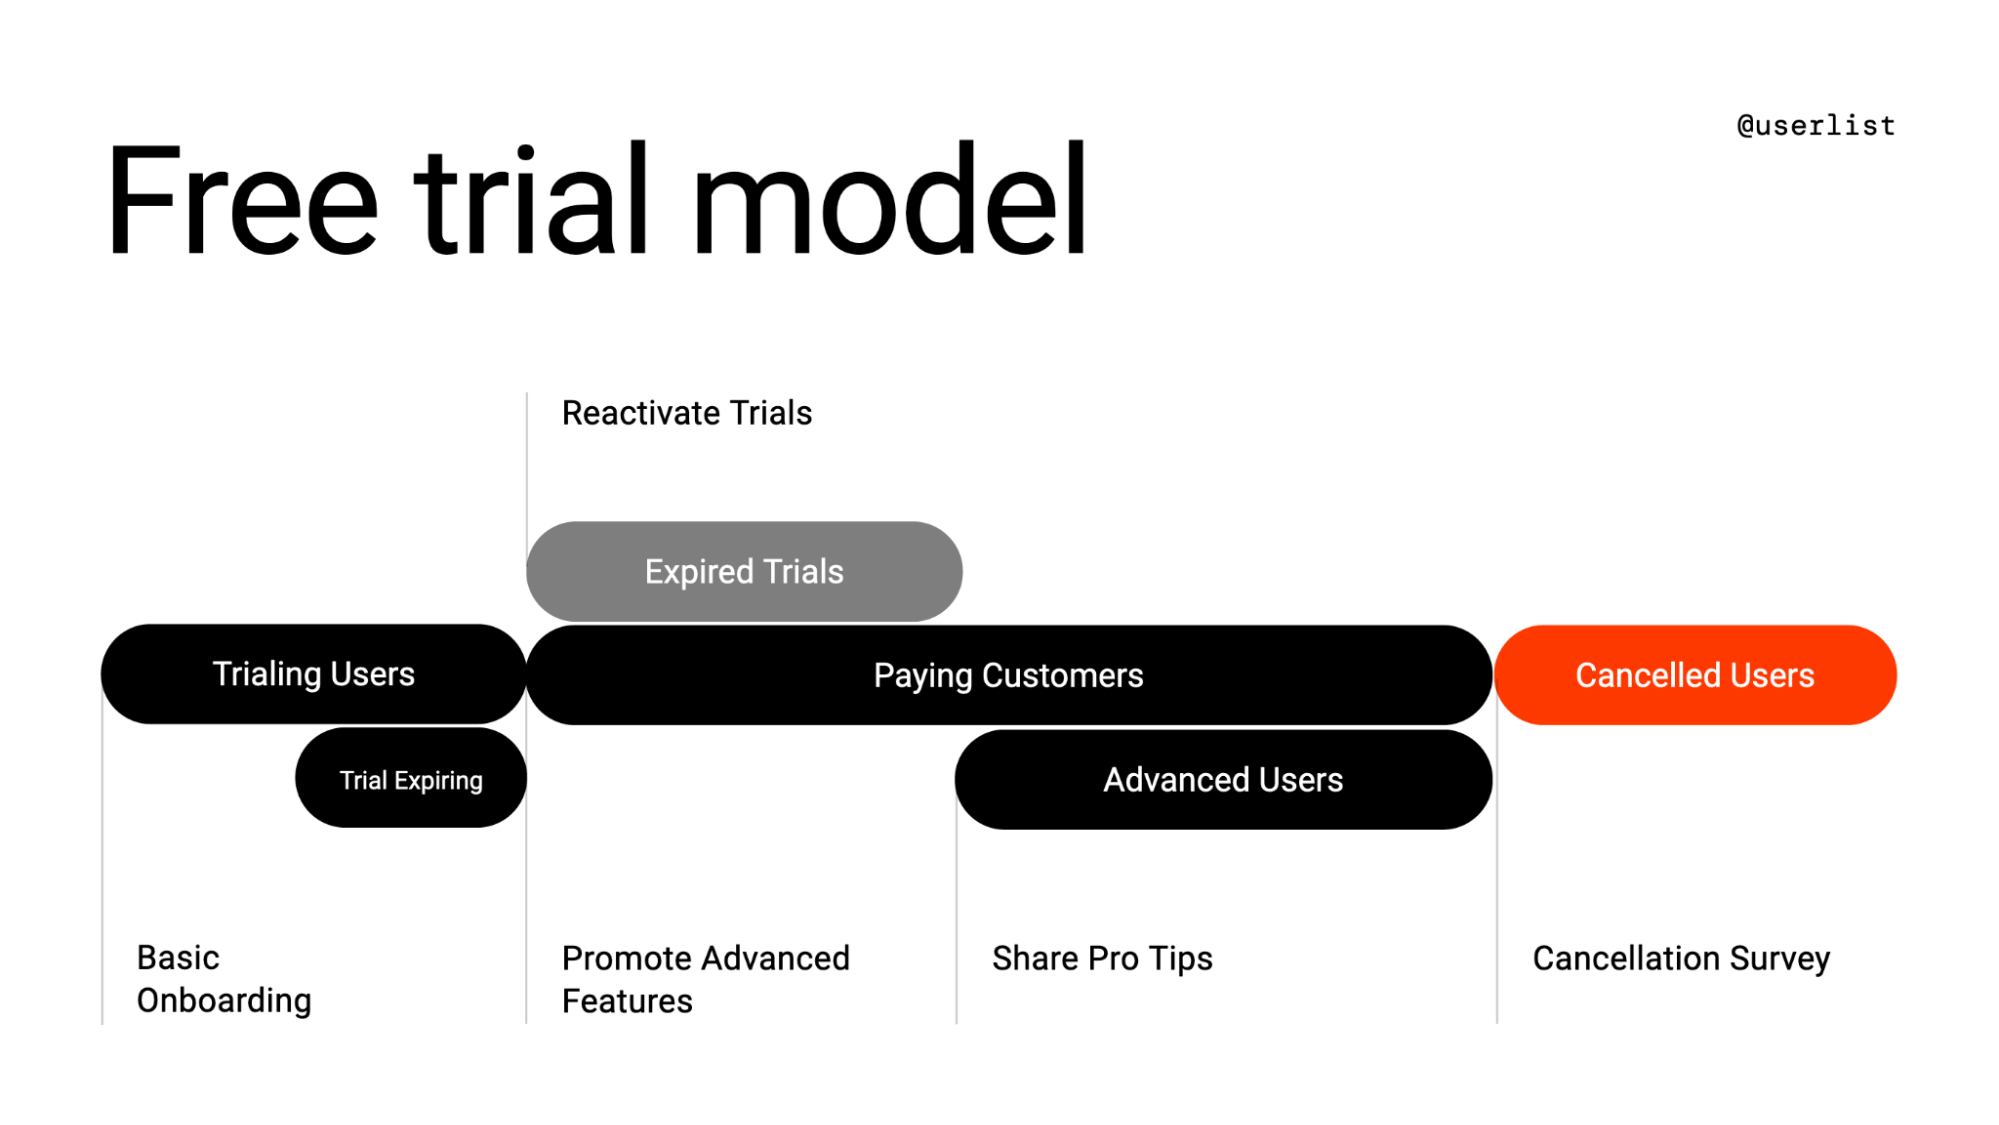 SaaS Customer Segmentation Guide: A map showing the free trial model